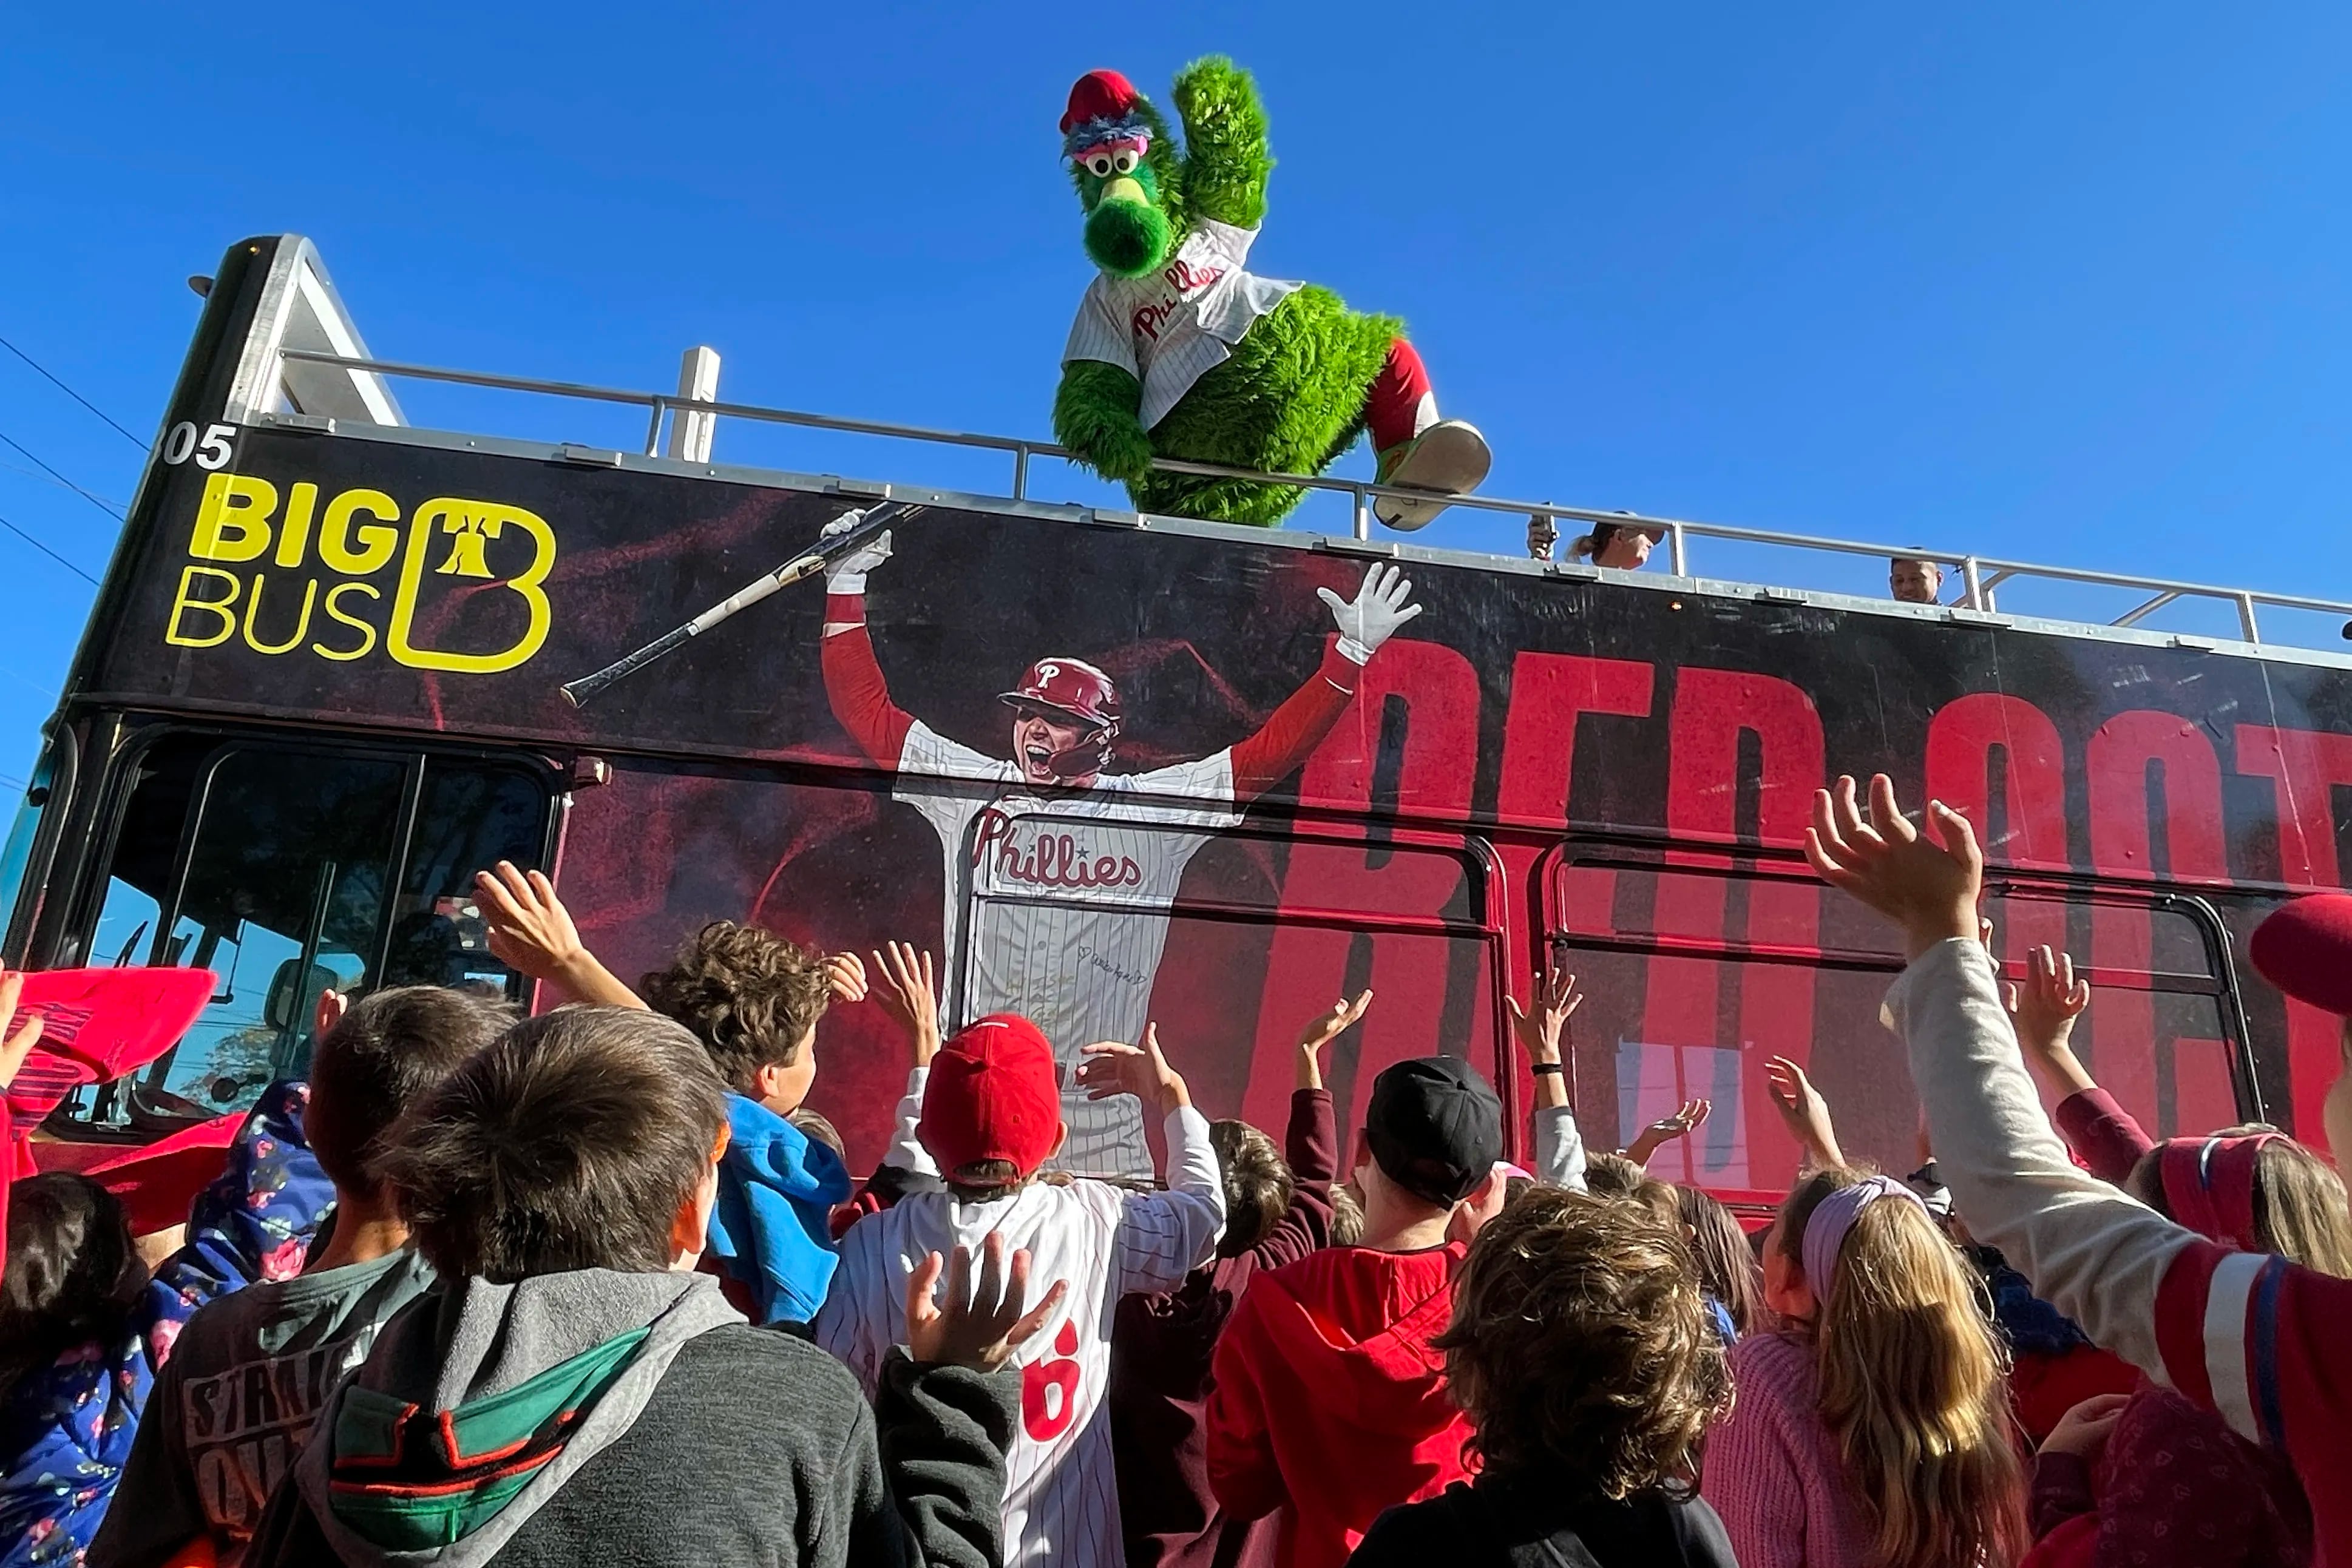 Pictures of the Phanatic rallying South Jersey elementary school